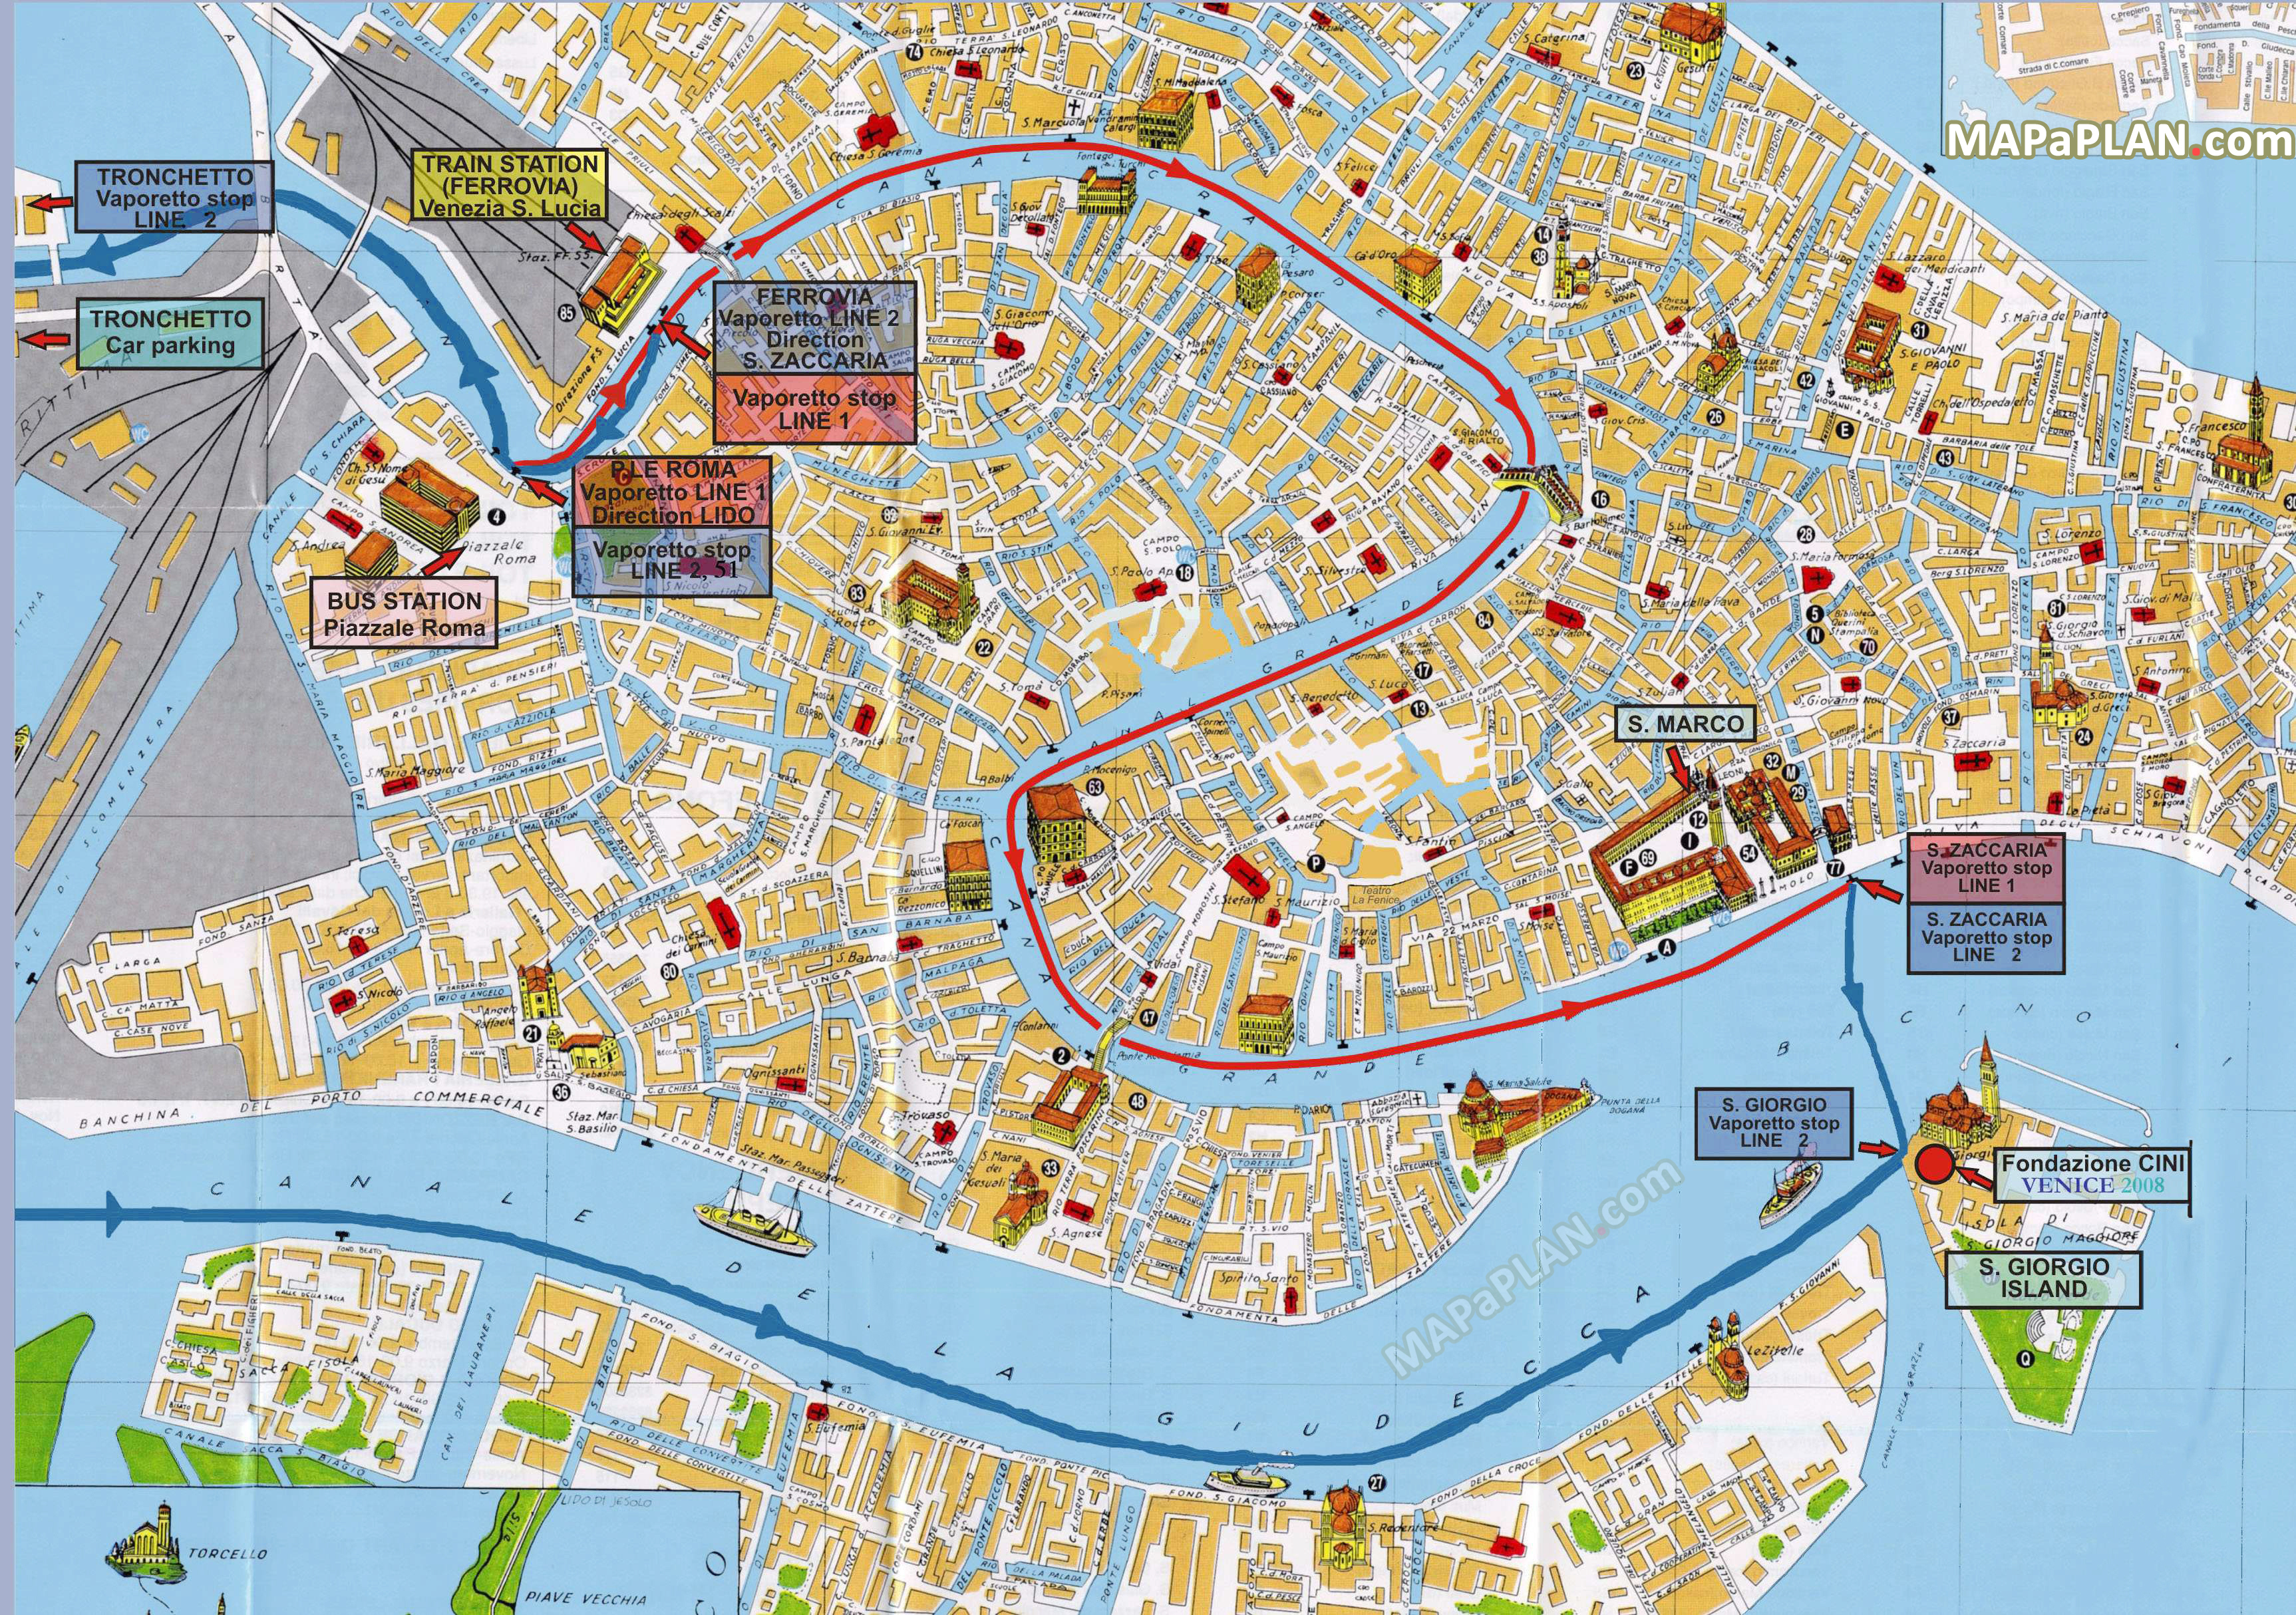 Train station Venezia Santa Lucia water buses with streets overlay Venice top tourist attractions map